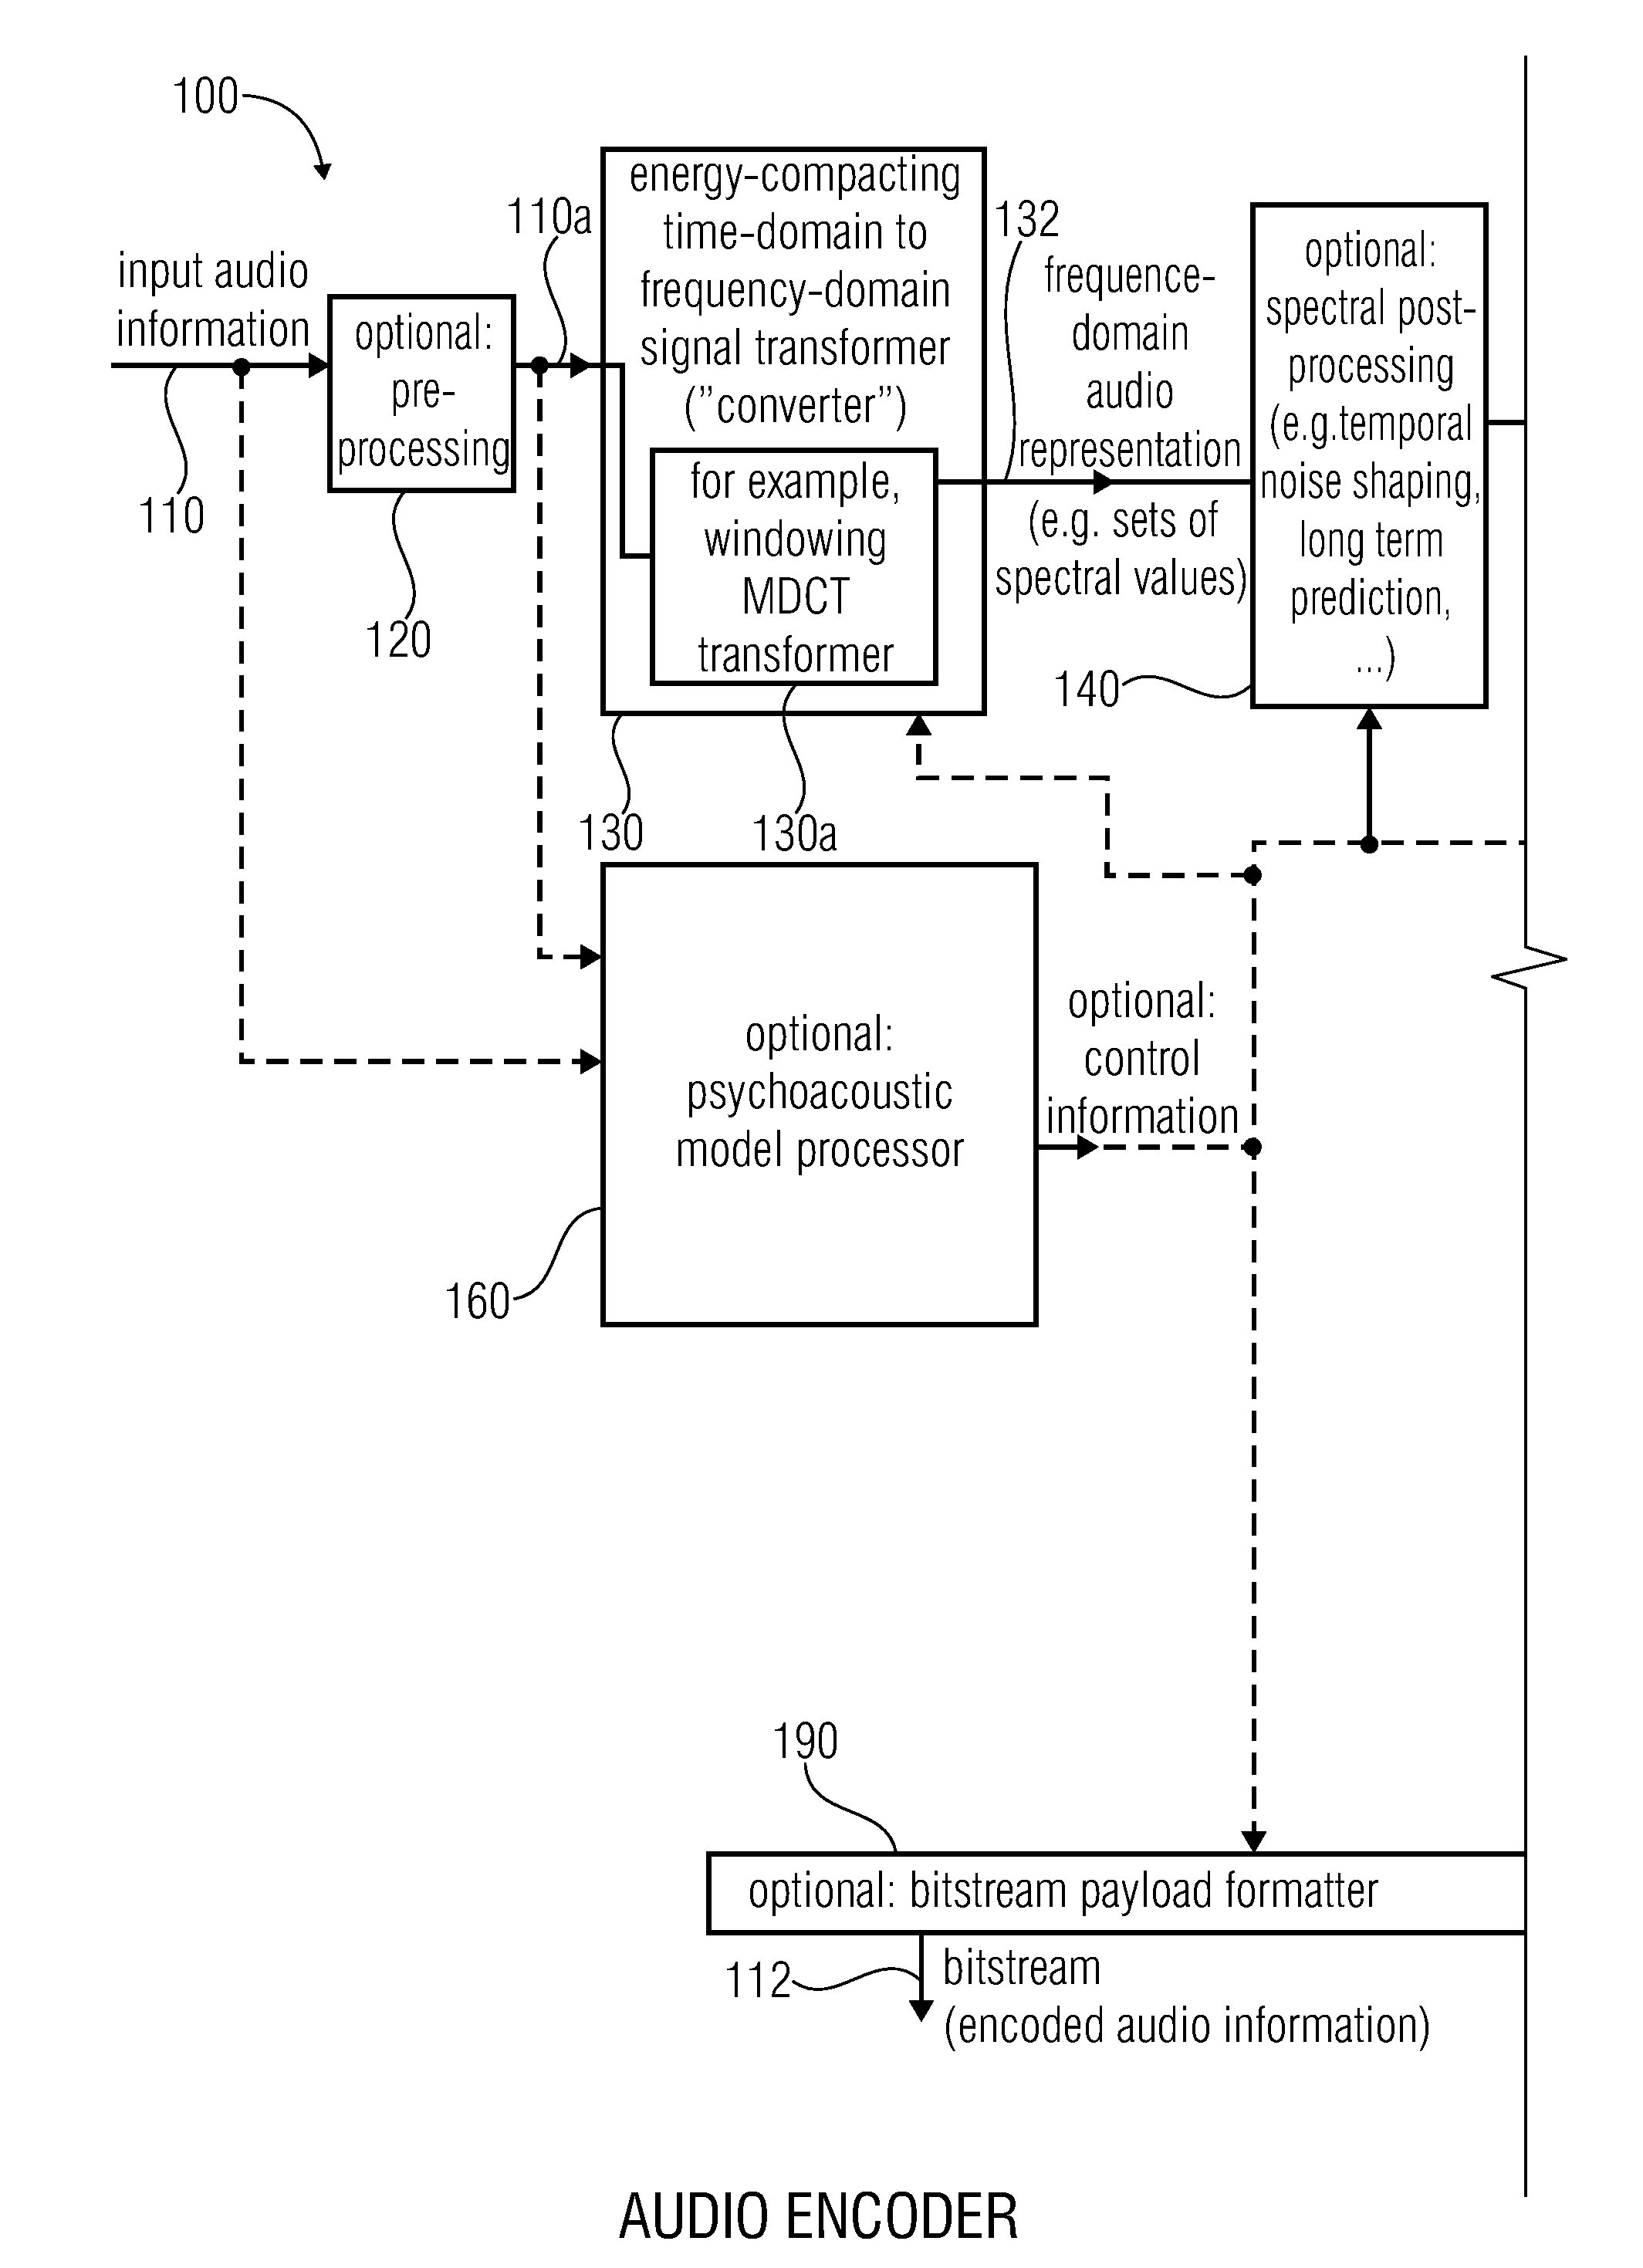 Audio encoder, audio decoder, method for encoding and audio information, method for decoding an audio information and computer program using a hash table describing both significant state values and interval boundaries